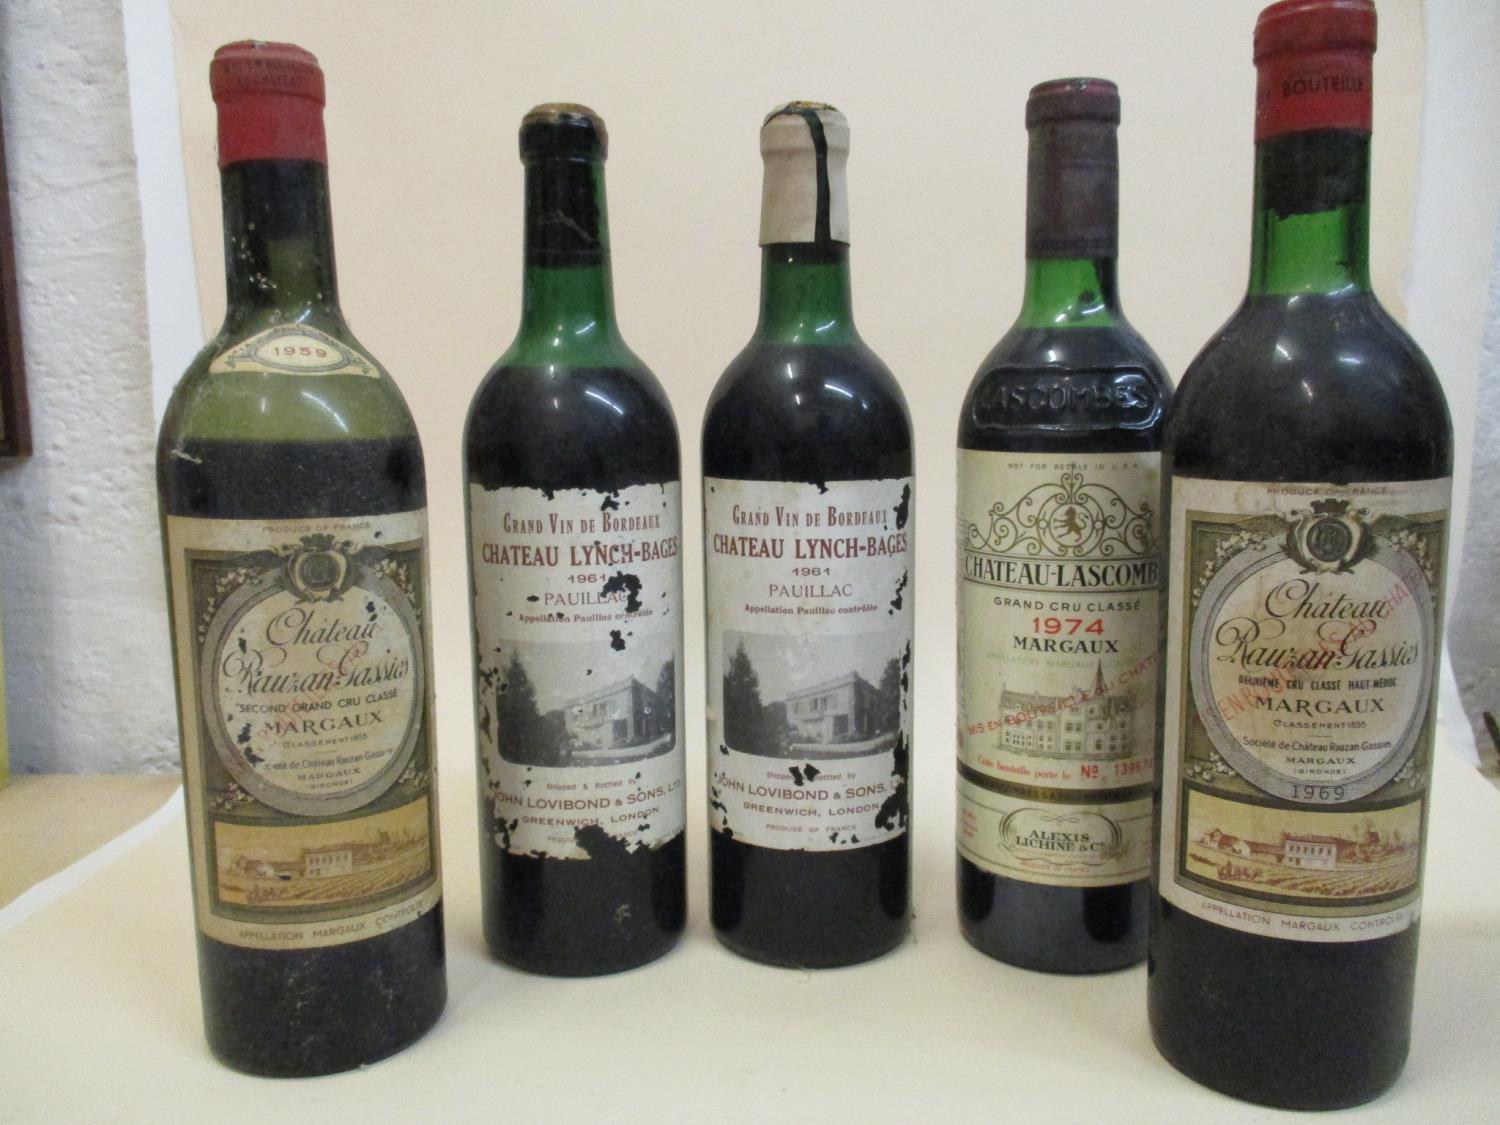 Two bottles of Chateau Lynch-Bages 1961 Pauillac, one bottle of Chateau-Lascombe 1974 Margaux, two